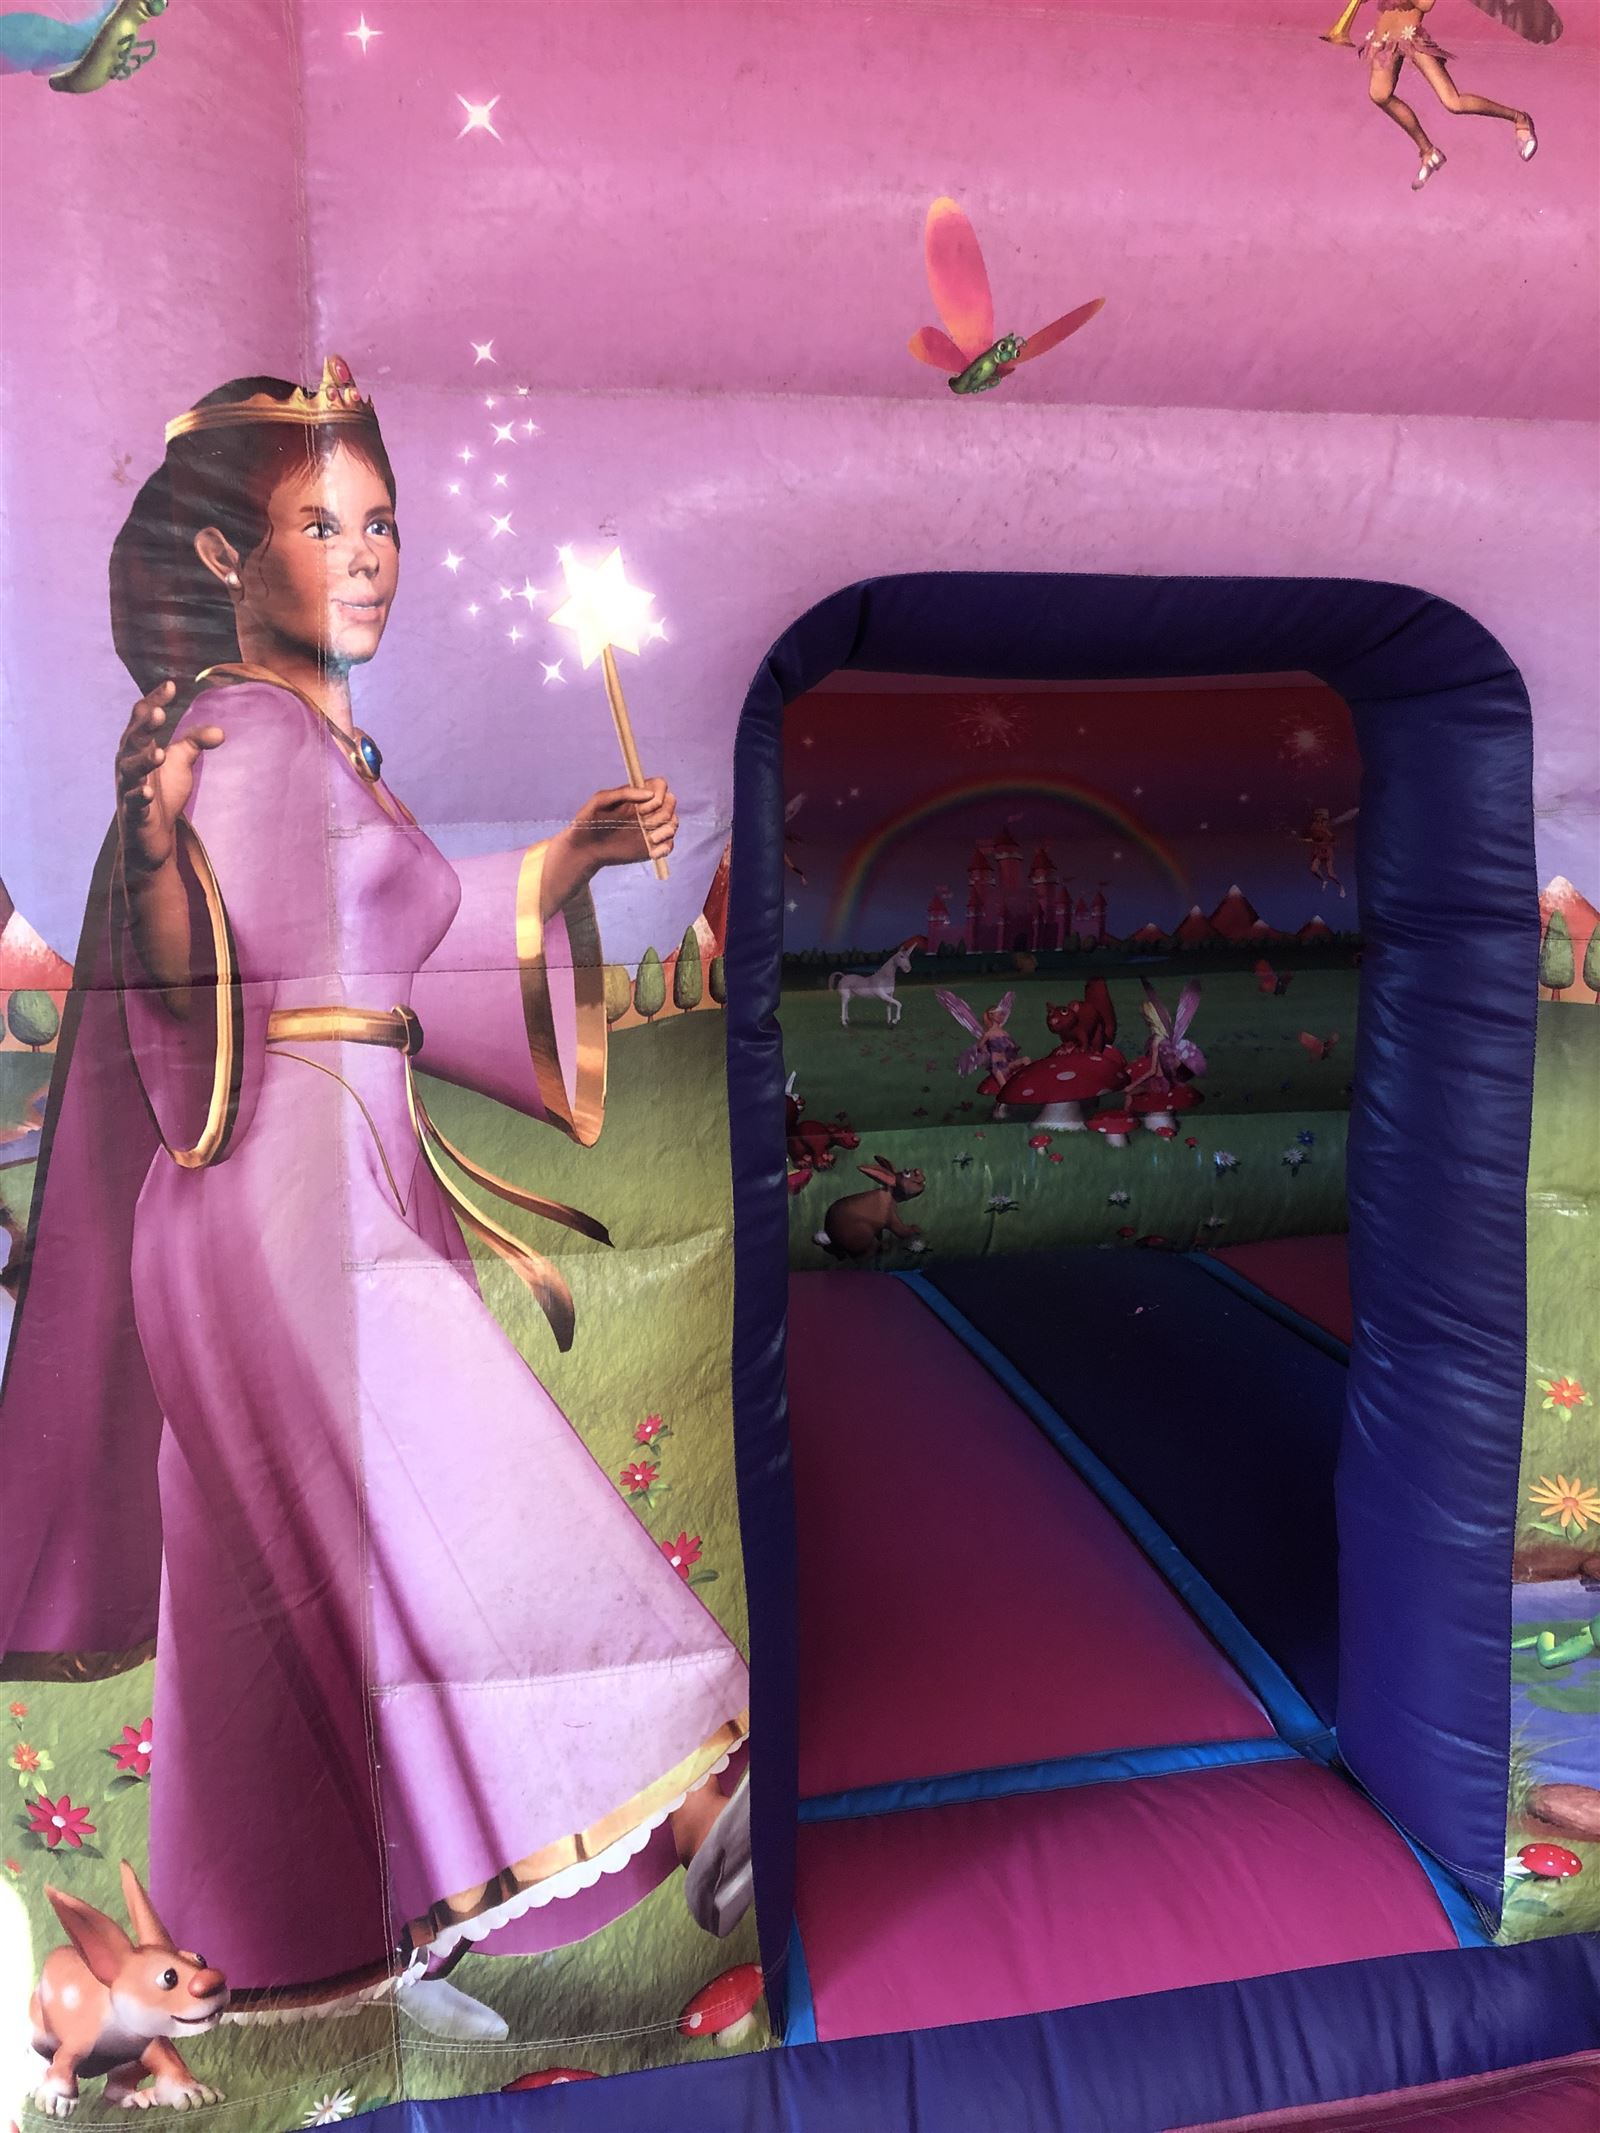 Ft X Ft Princess Bounce House Slide Combo Bouncy Castle Hire In Crawley West Sussex